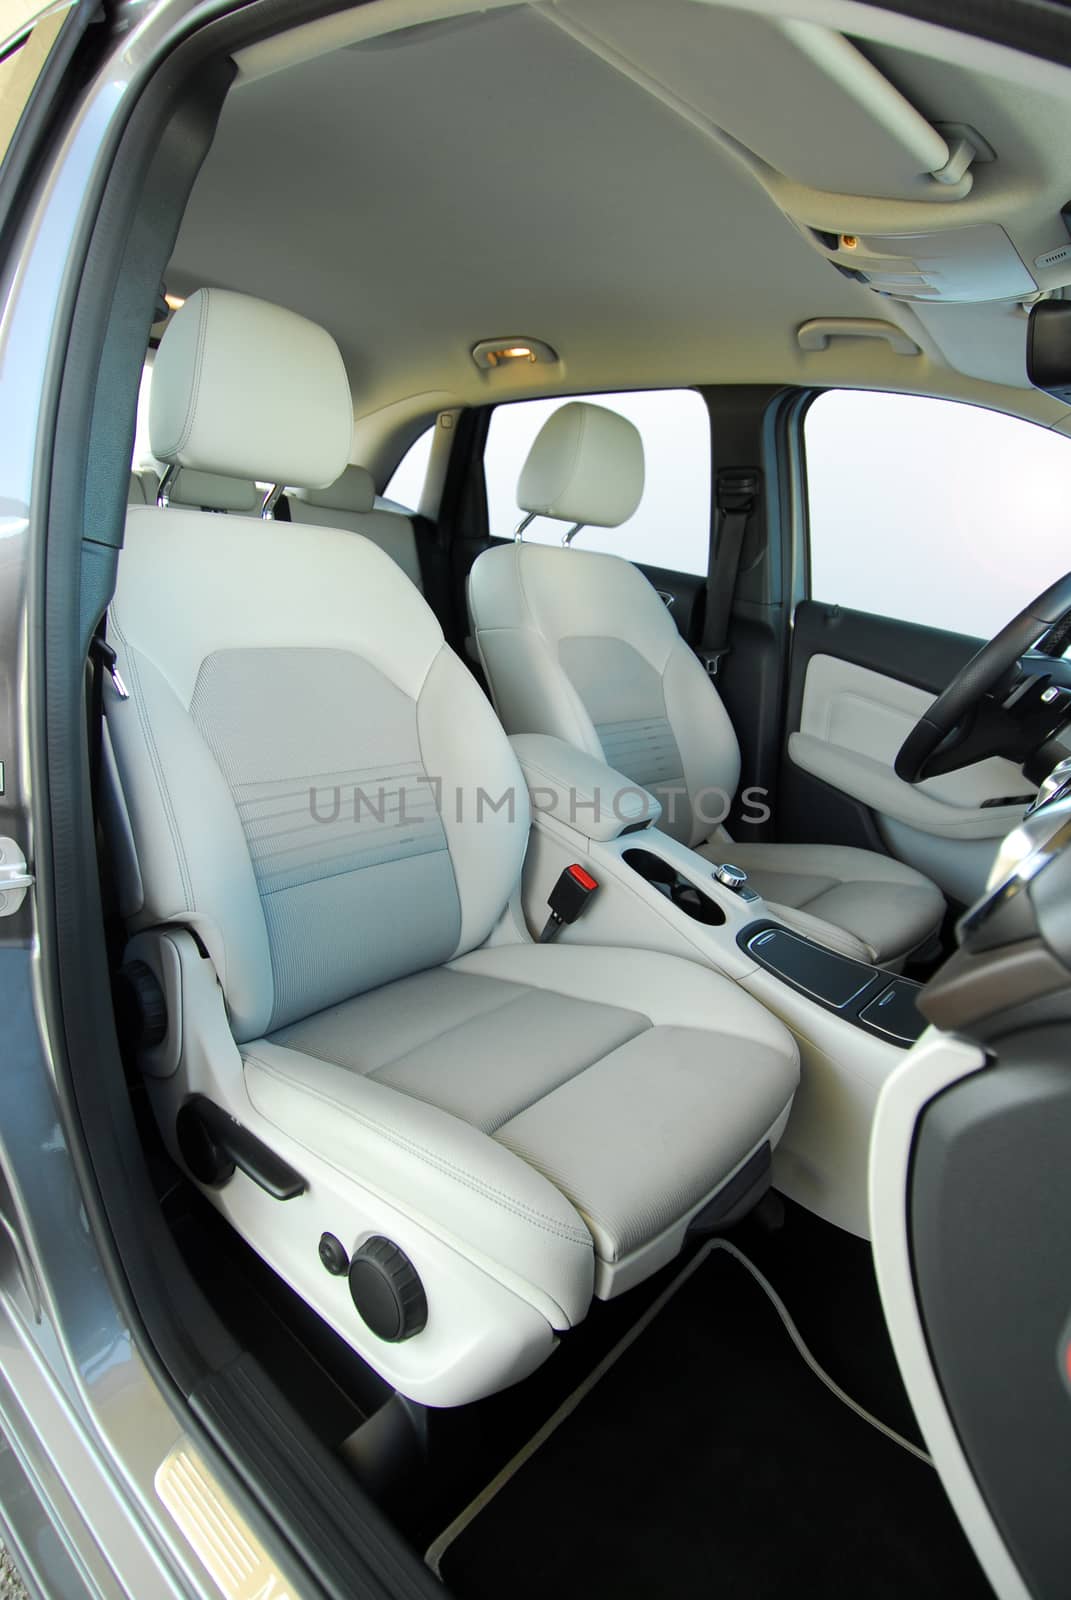 White front seats in a large passenger car